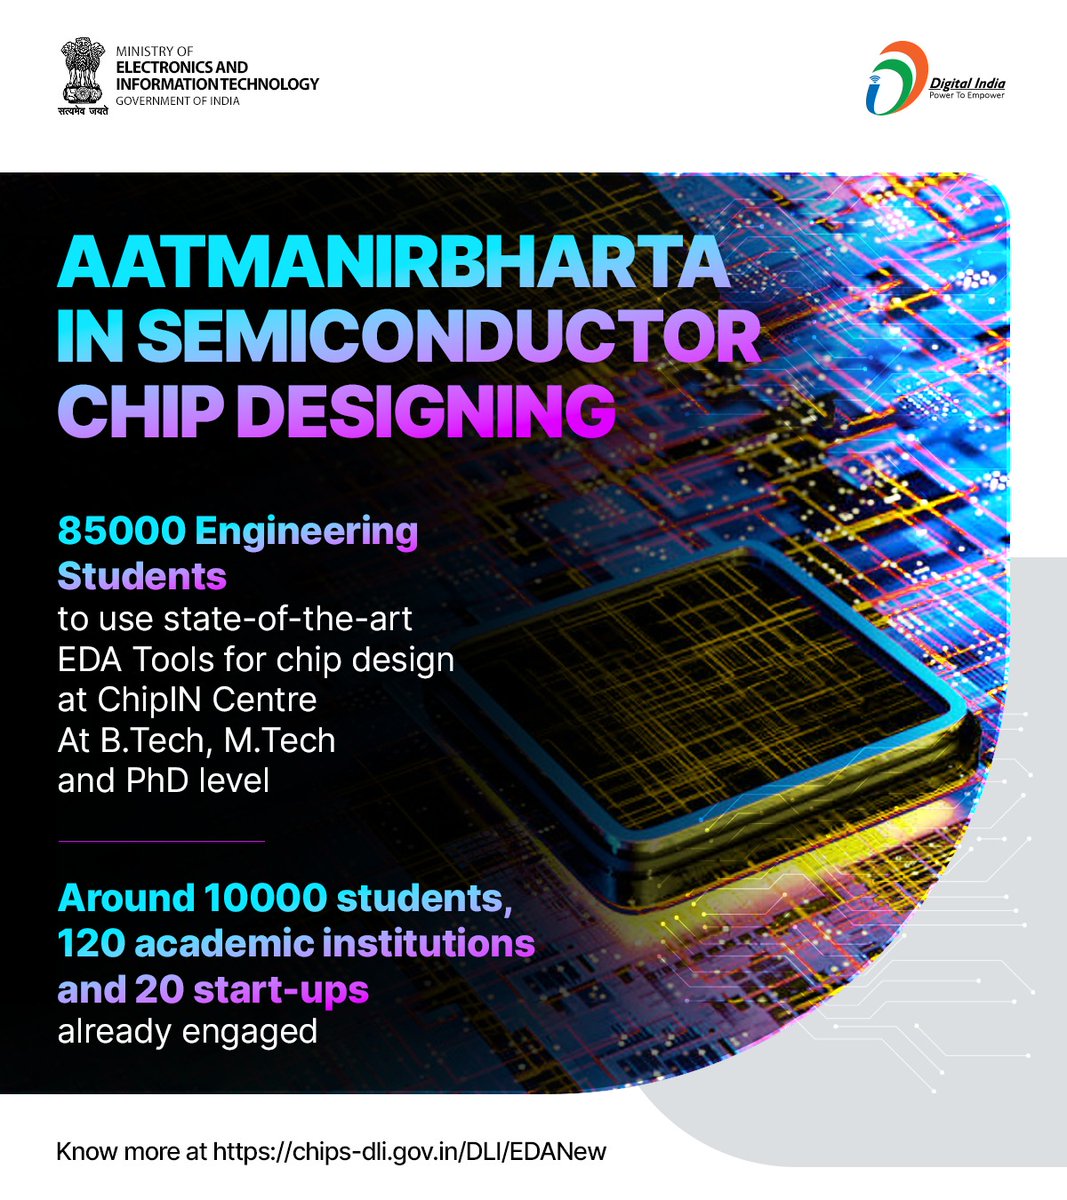 ChipIN - The one-stop centre for chip designers across the country!

Aims to bring the chip design infrastructure to the doorsteps of the semiconductor design community.

#DigitalIndia #ViksitBharat #SemiconIndia